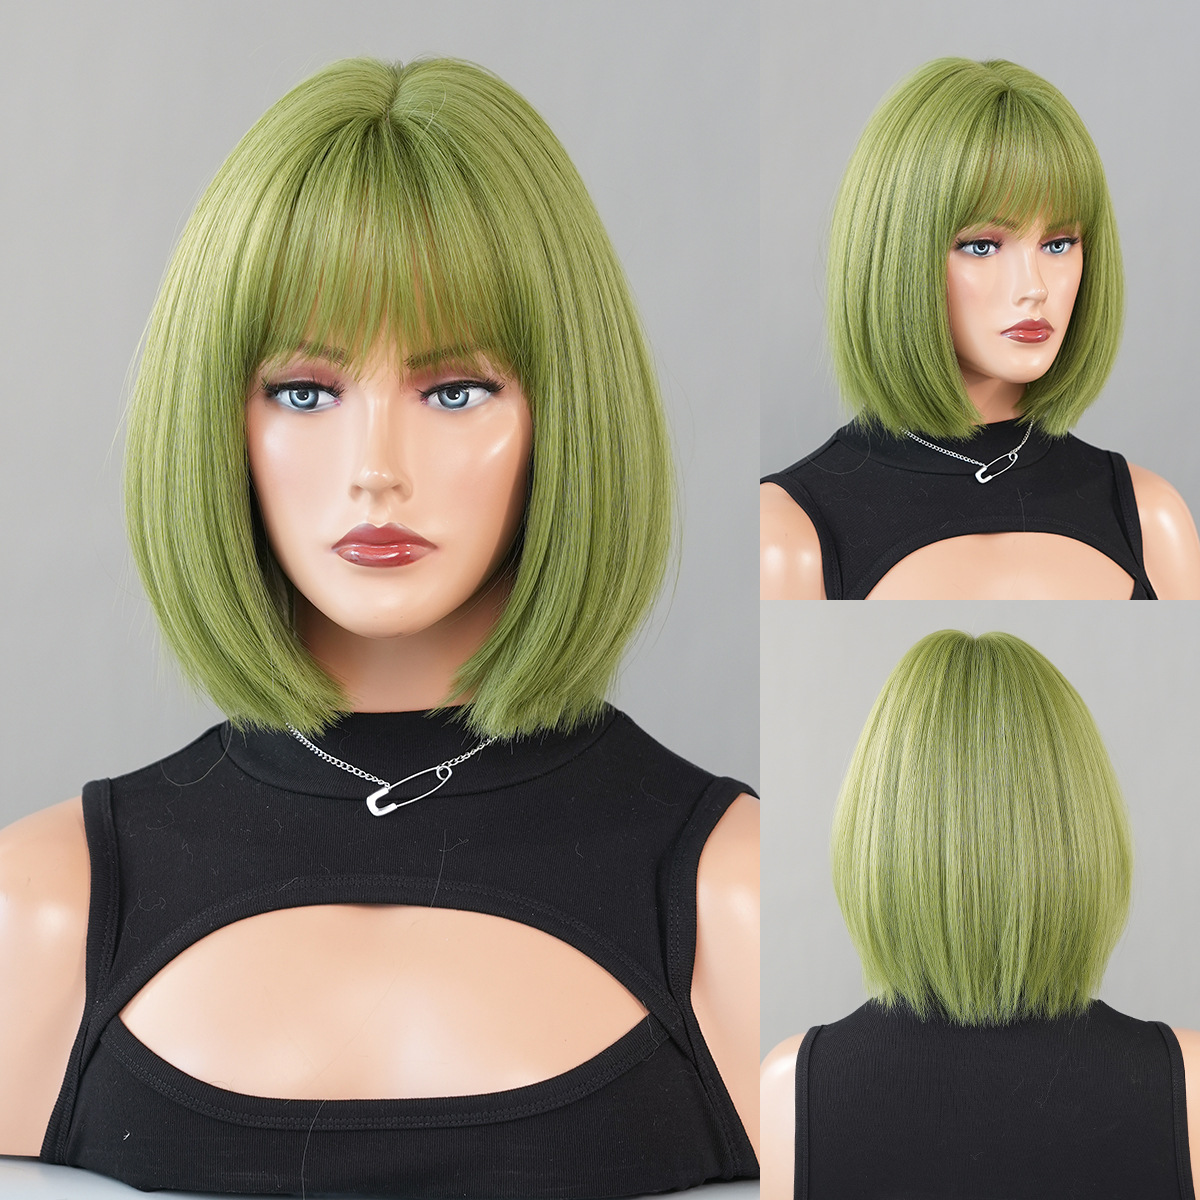 Synthetic wig featuring a YAKI black bob style, with sleek short straight hair and bangs, ready for immediate use